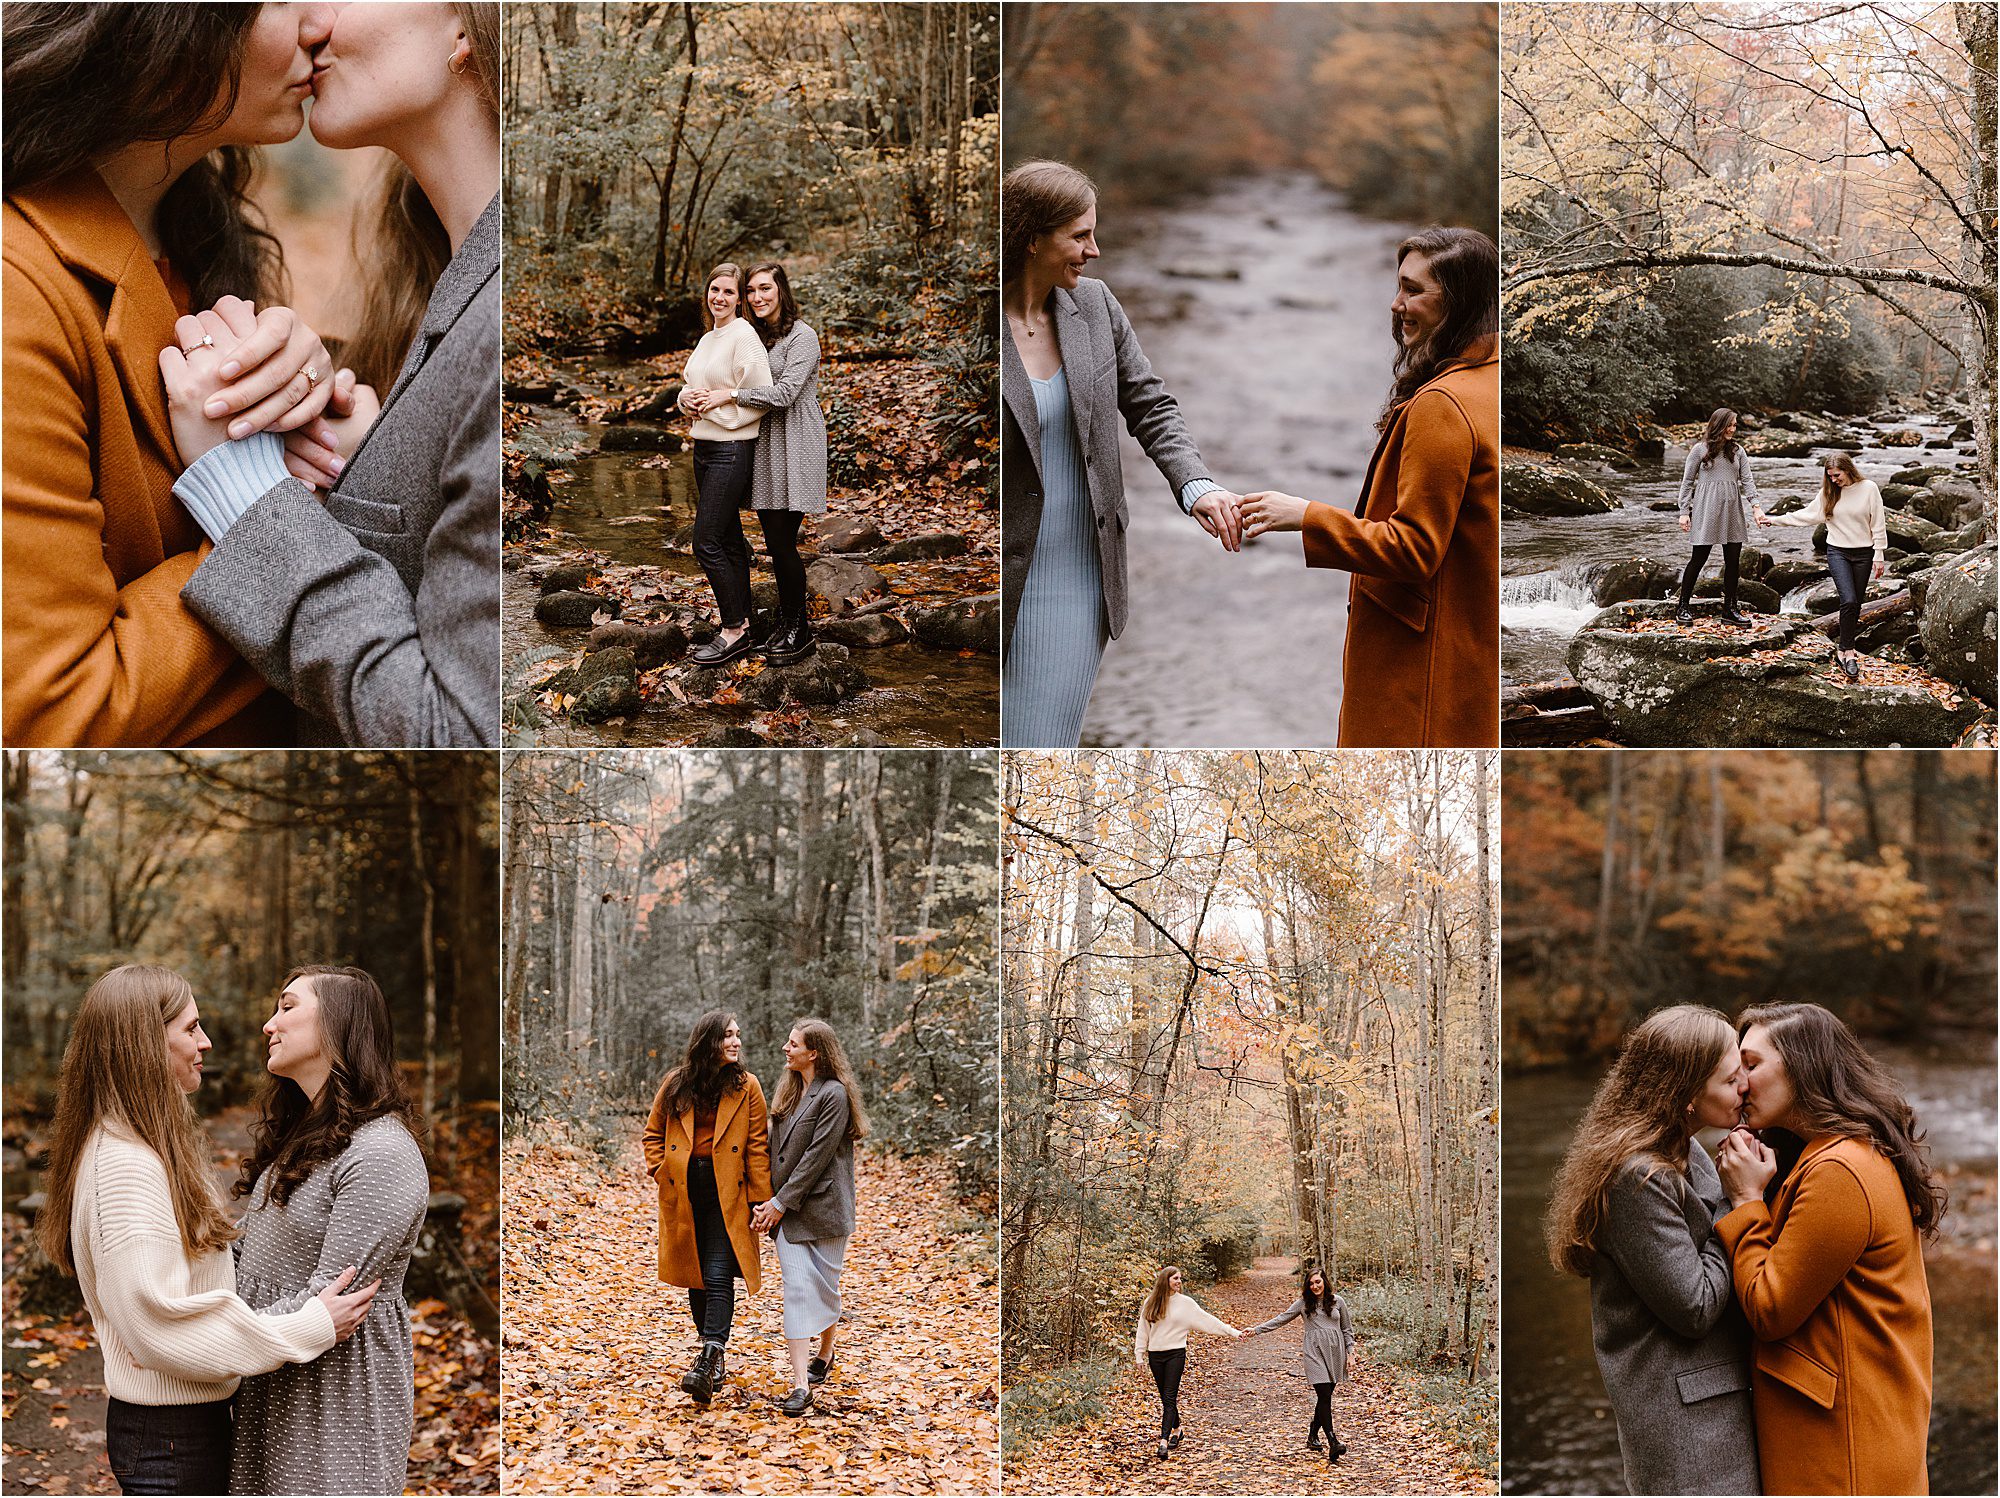 Autumn Engagement Photos in Peak Colors in Tennessee